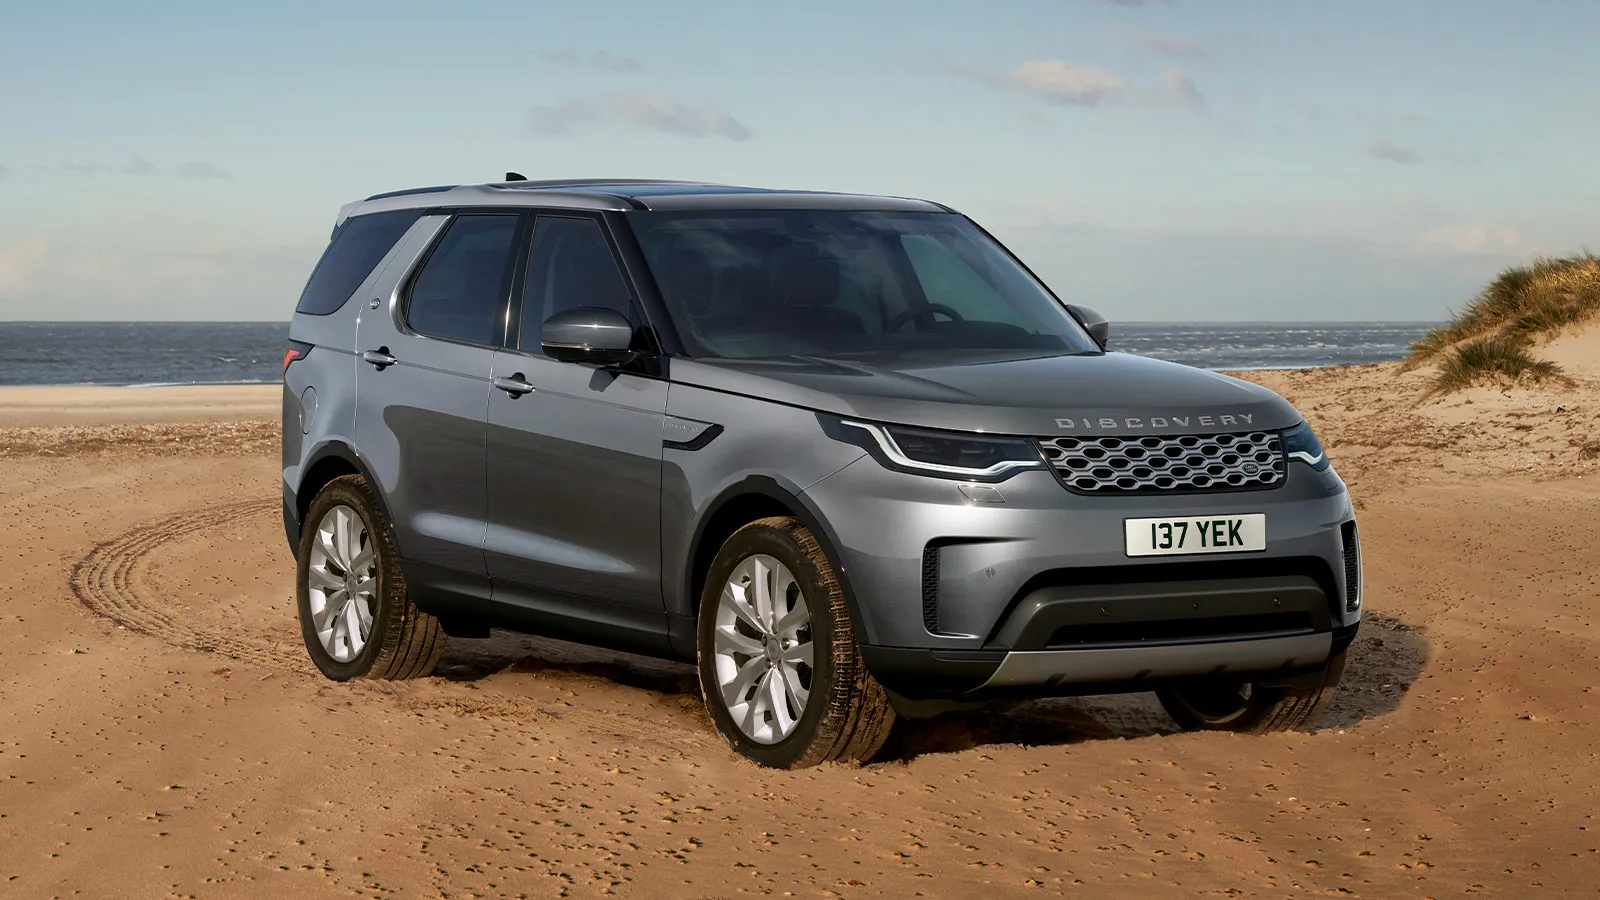 Silver Land Rover Discovery exterior side parked